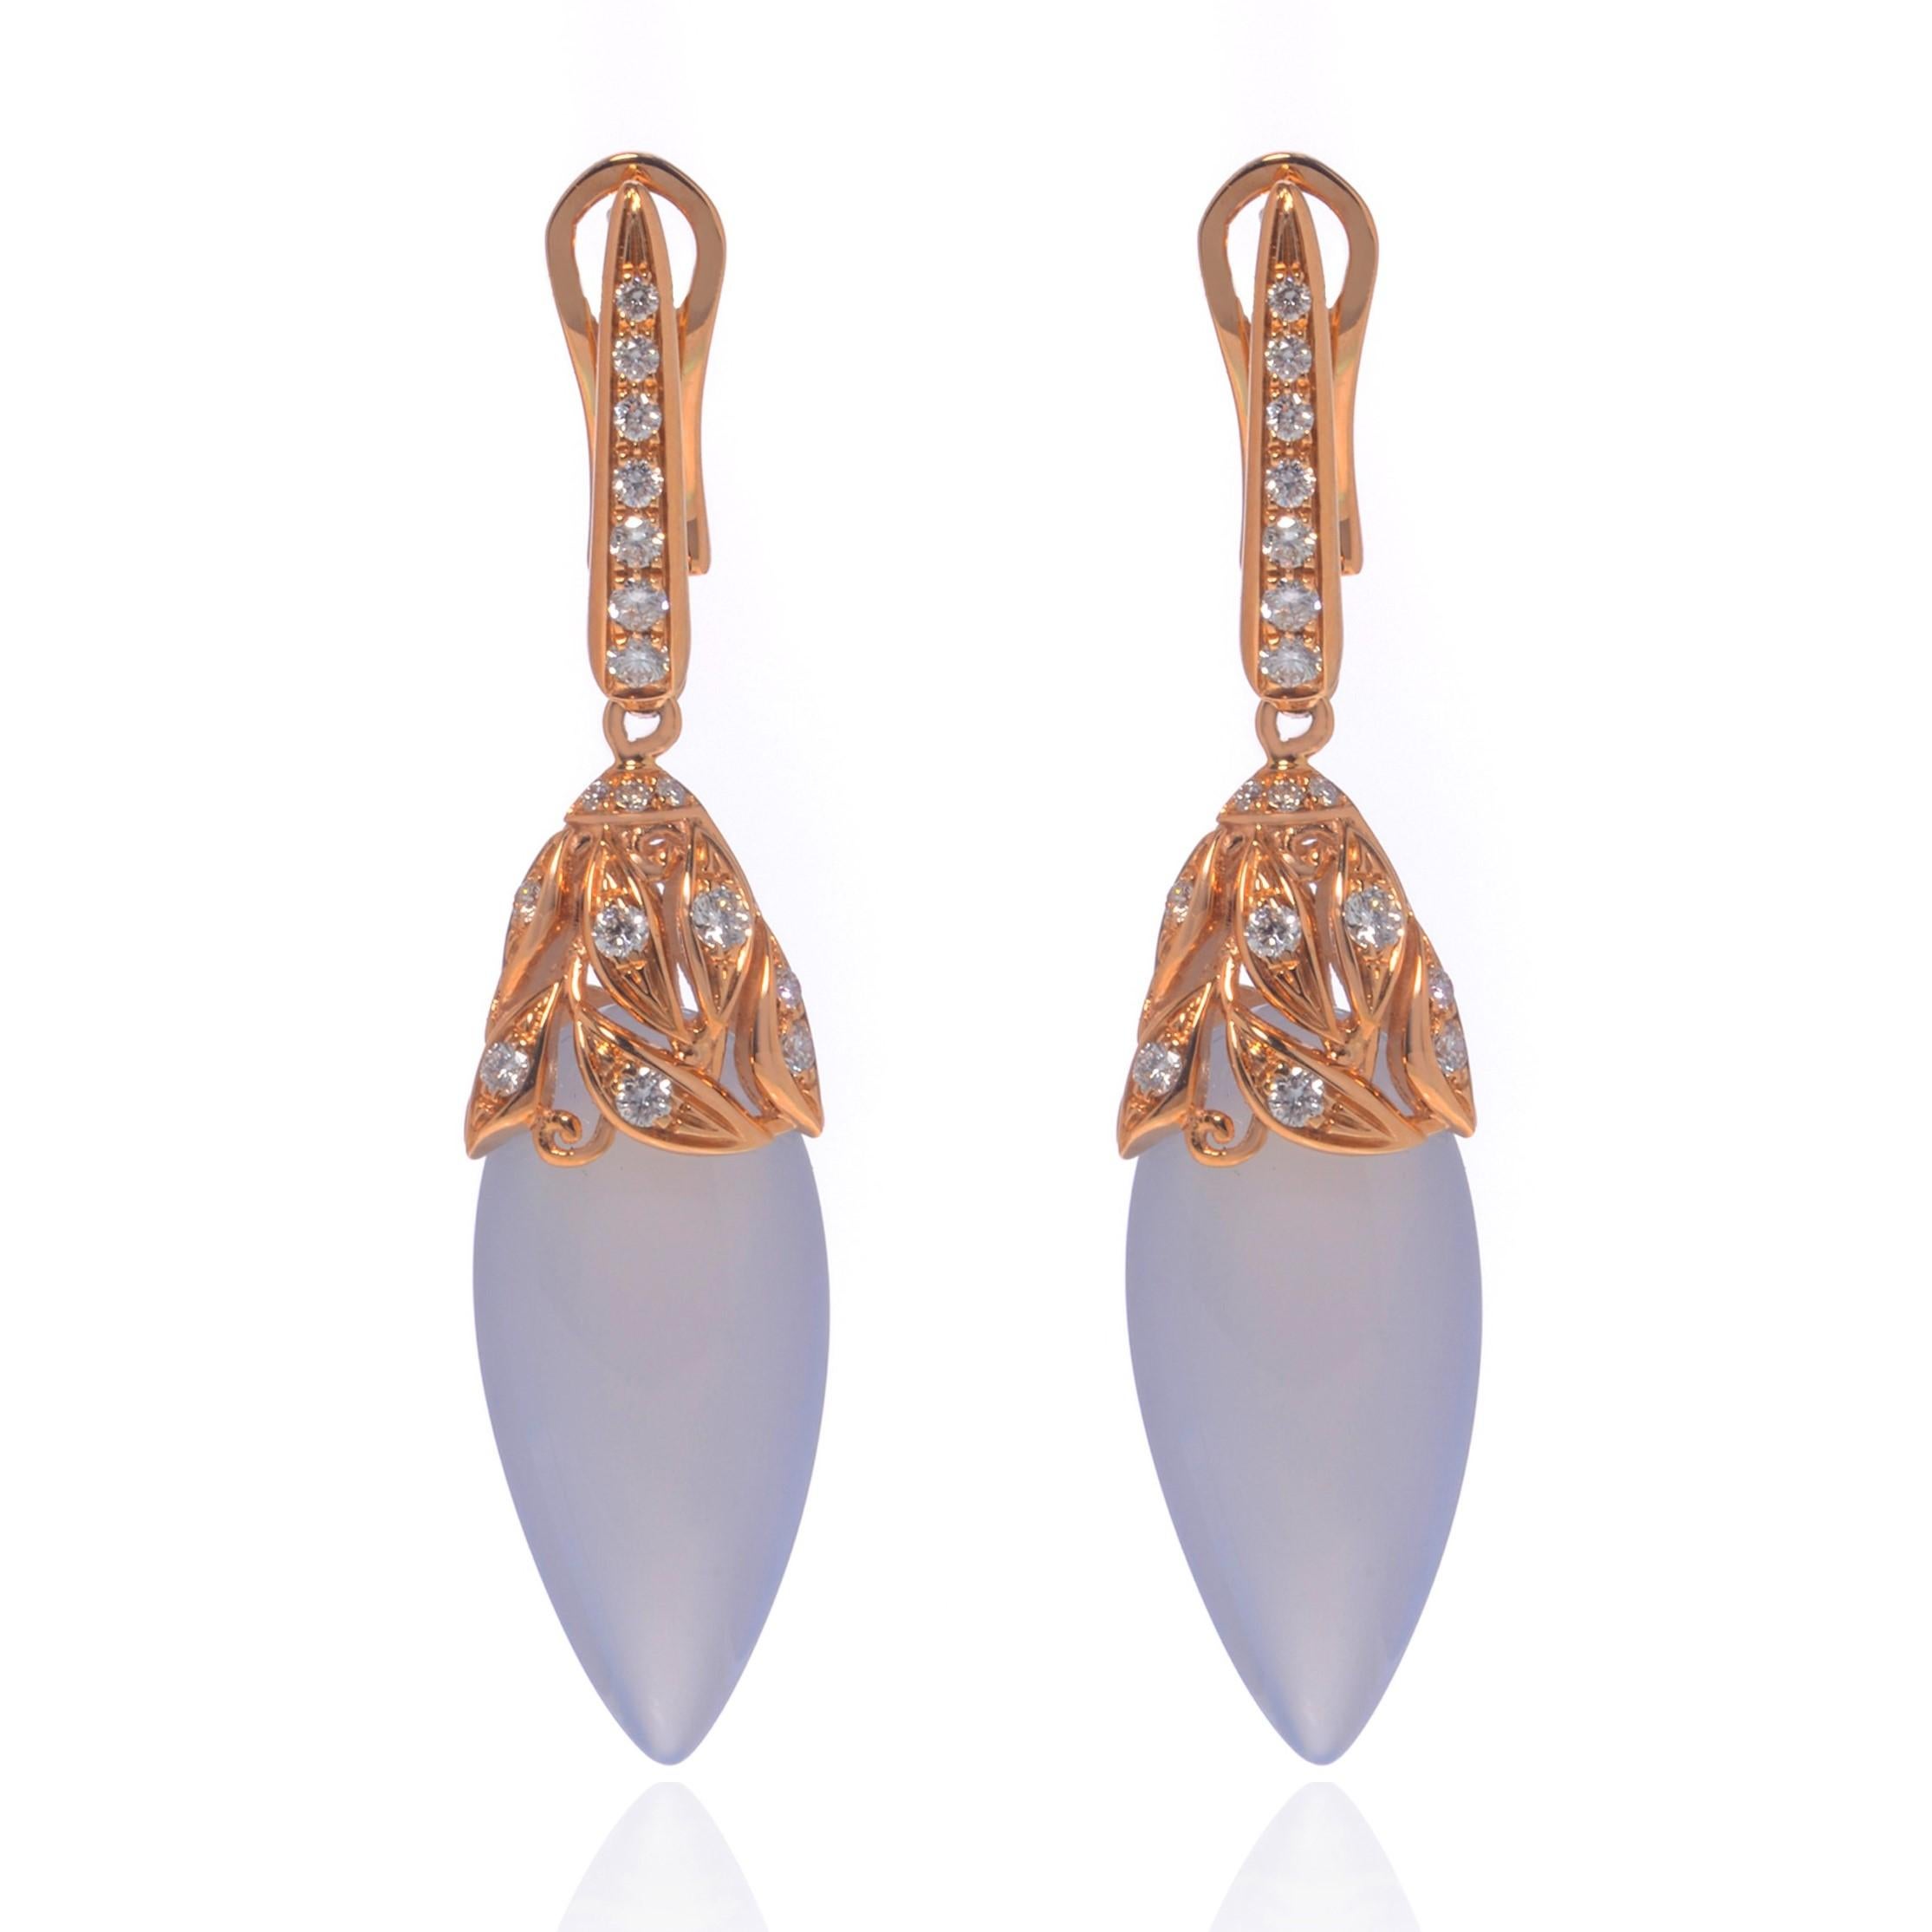 Chalcedony and diamond drop earrings of classic contemporary styling. The earrings are crafted in 18k rose gold and set with a combination of Chalcedony and round brilliant cut diamonds. Diamonds are pave set and have a total weight of 0.45. Diamond